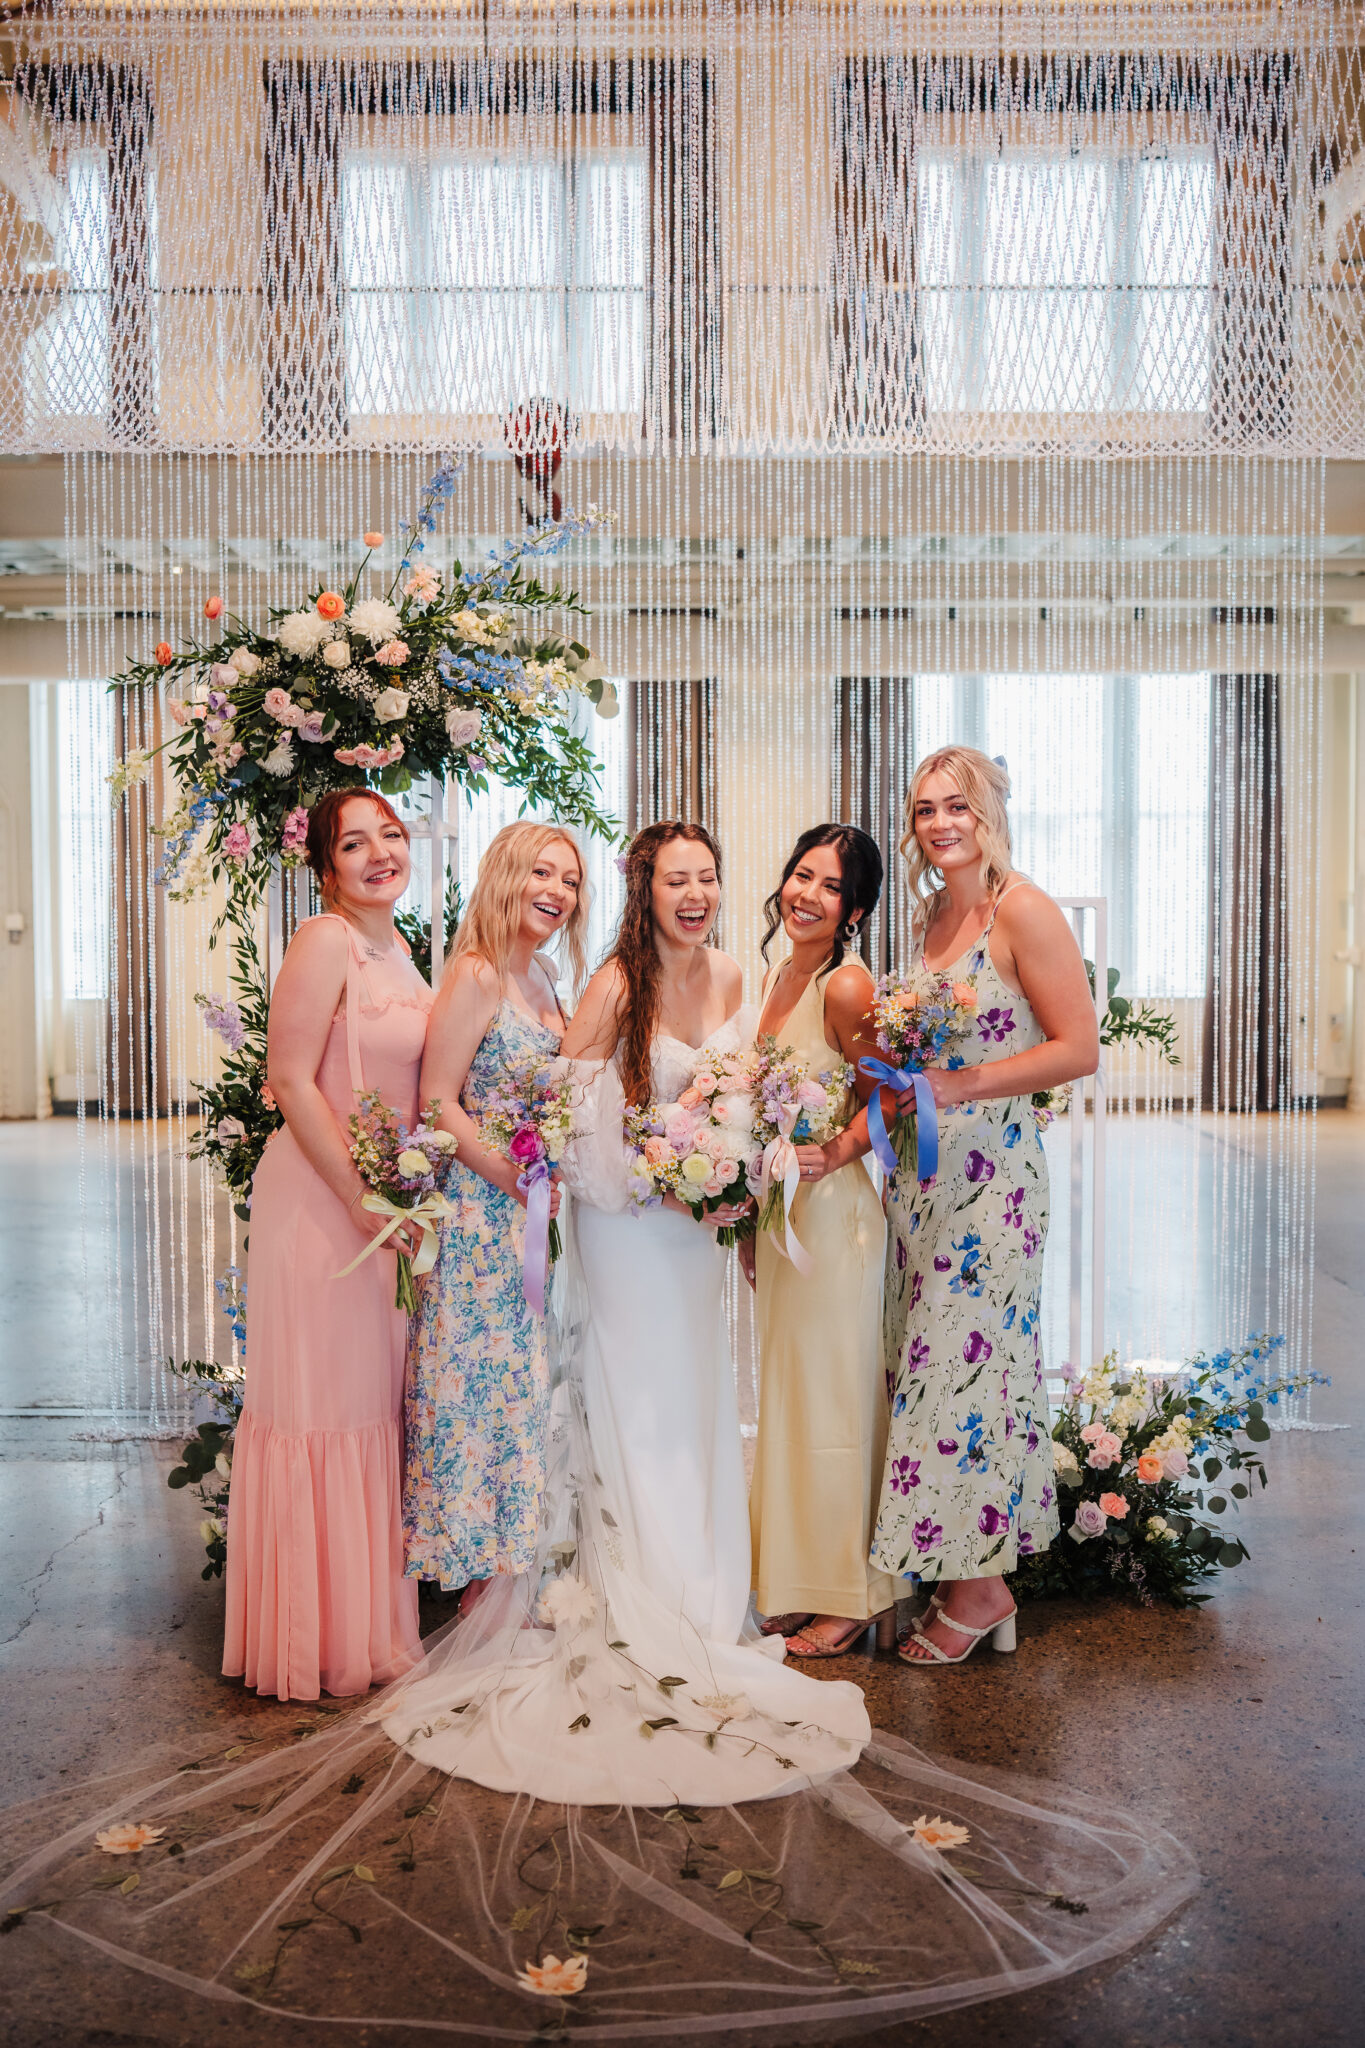 A bride stands at the altar with her bridesmaids in the elegant setting of The Machine Shop wedding venue, showcasing a moment of friendship, love, and anticipation in a stylish urban backdrop.